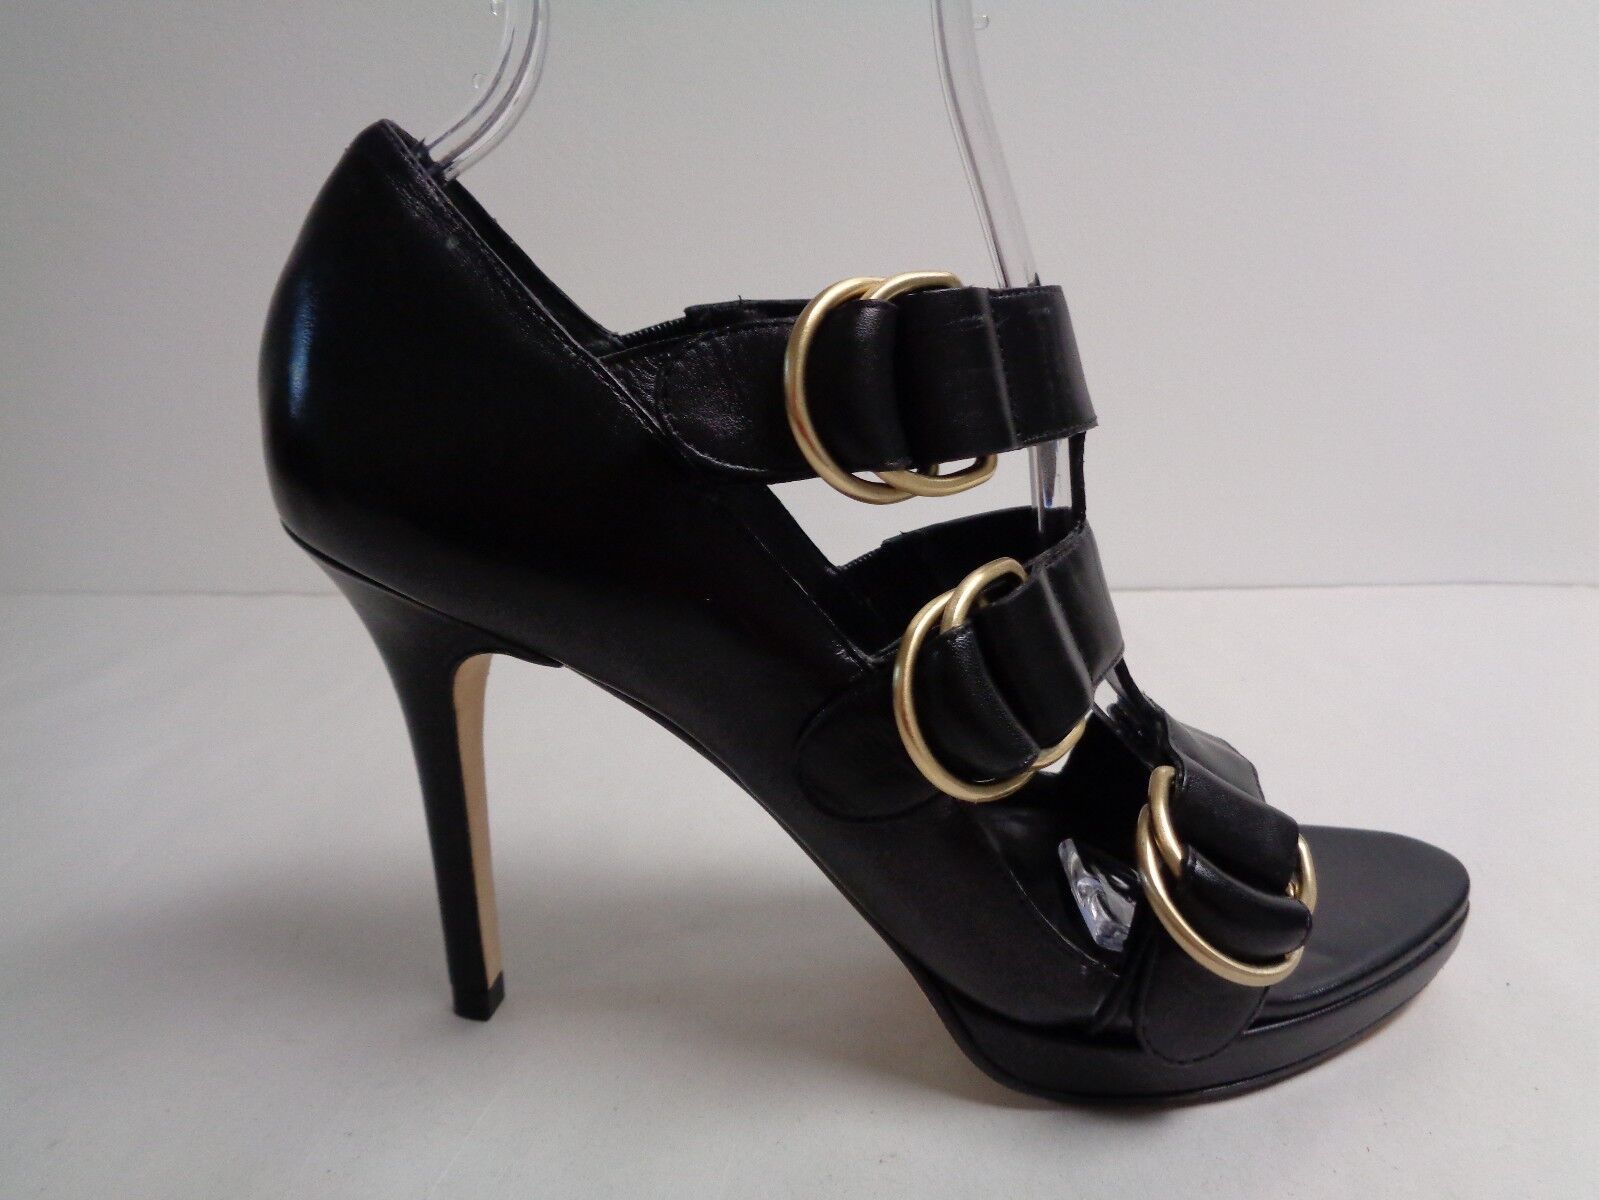 Primary image for Cole Haan Size 7.5 VERONICA OT PUMP Black Leather Heels Pumps New Womens Shoes